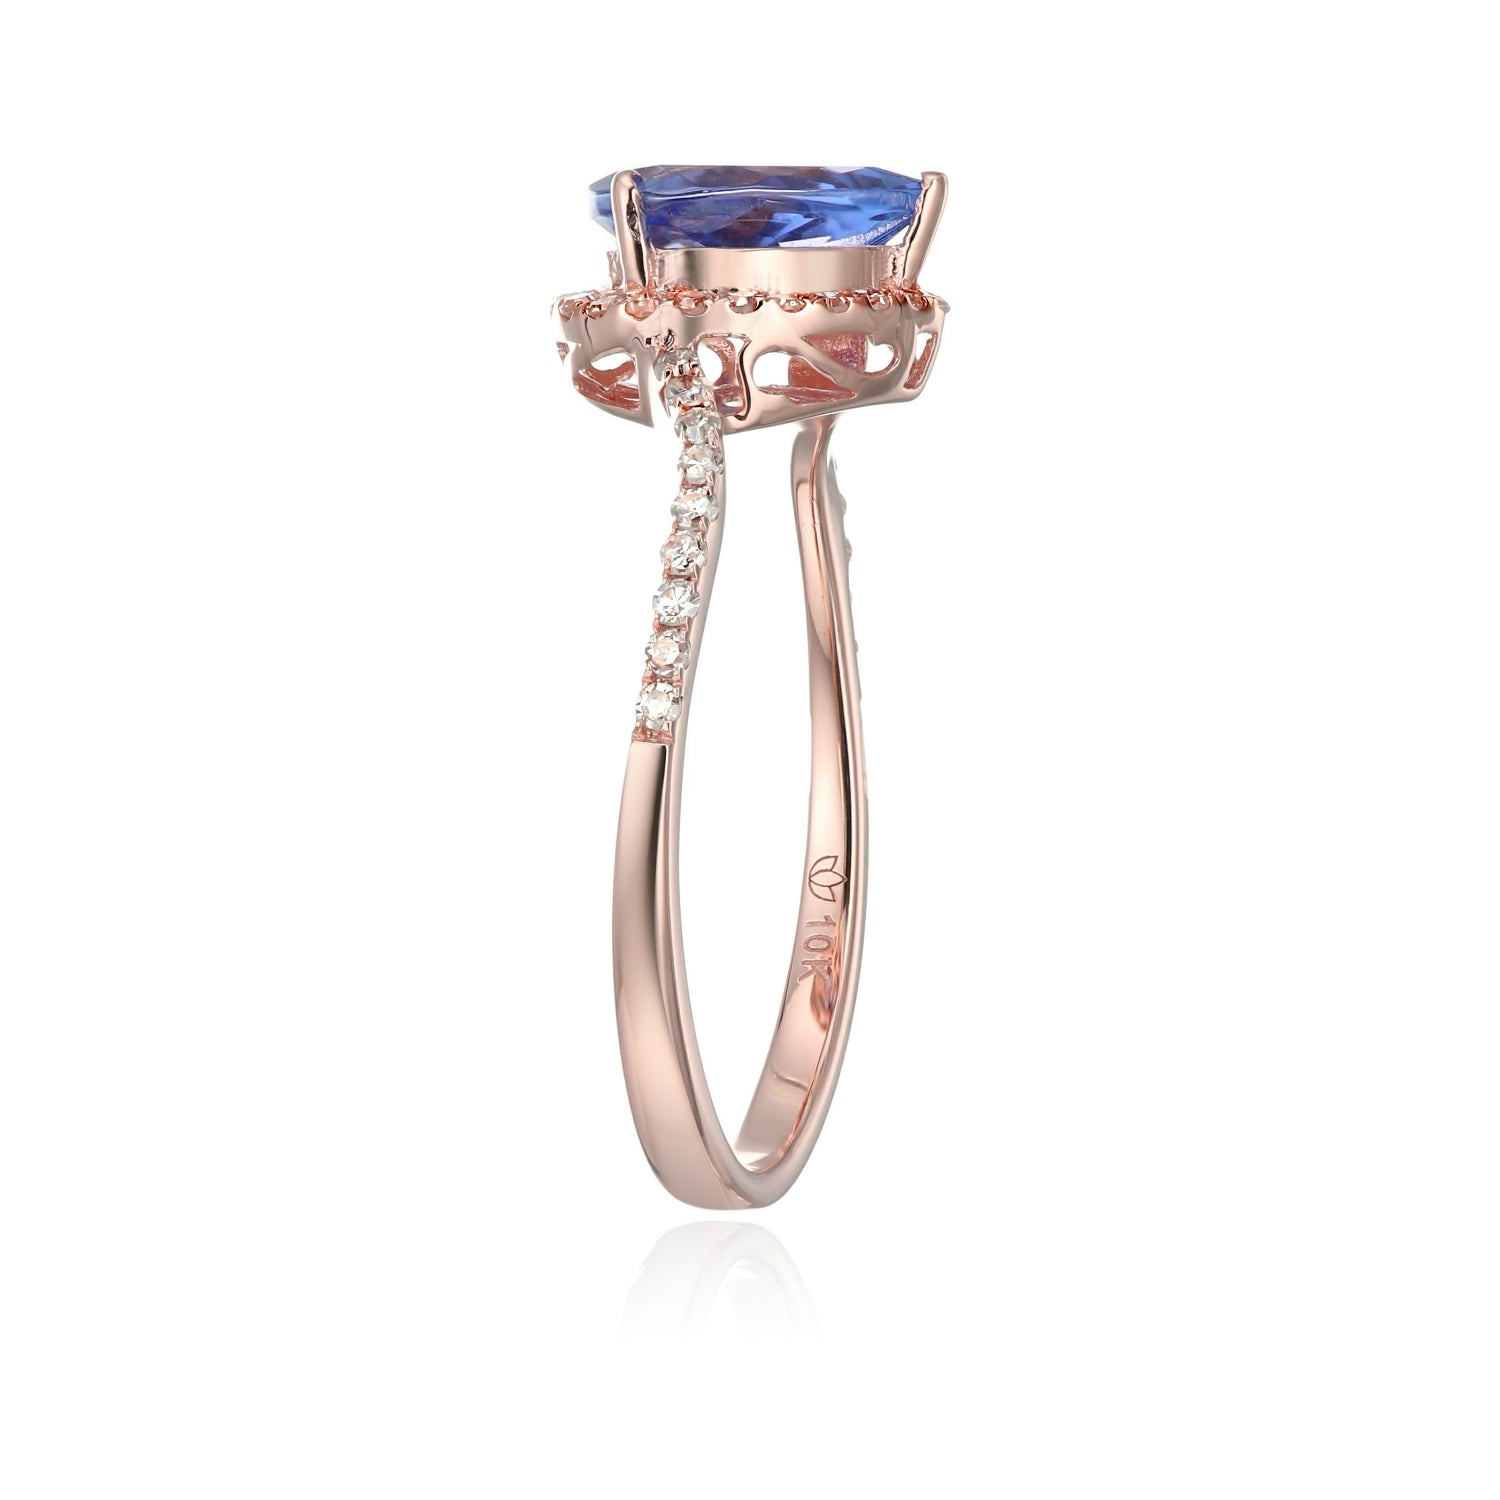 10k Rose Gold Tanzanite and Diamond Princess Diana Pear Shape Engagement Ring (1/5cttw, H-I Color, I1-I2 Clarity), - pinctore